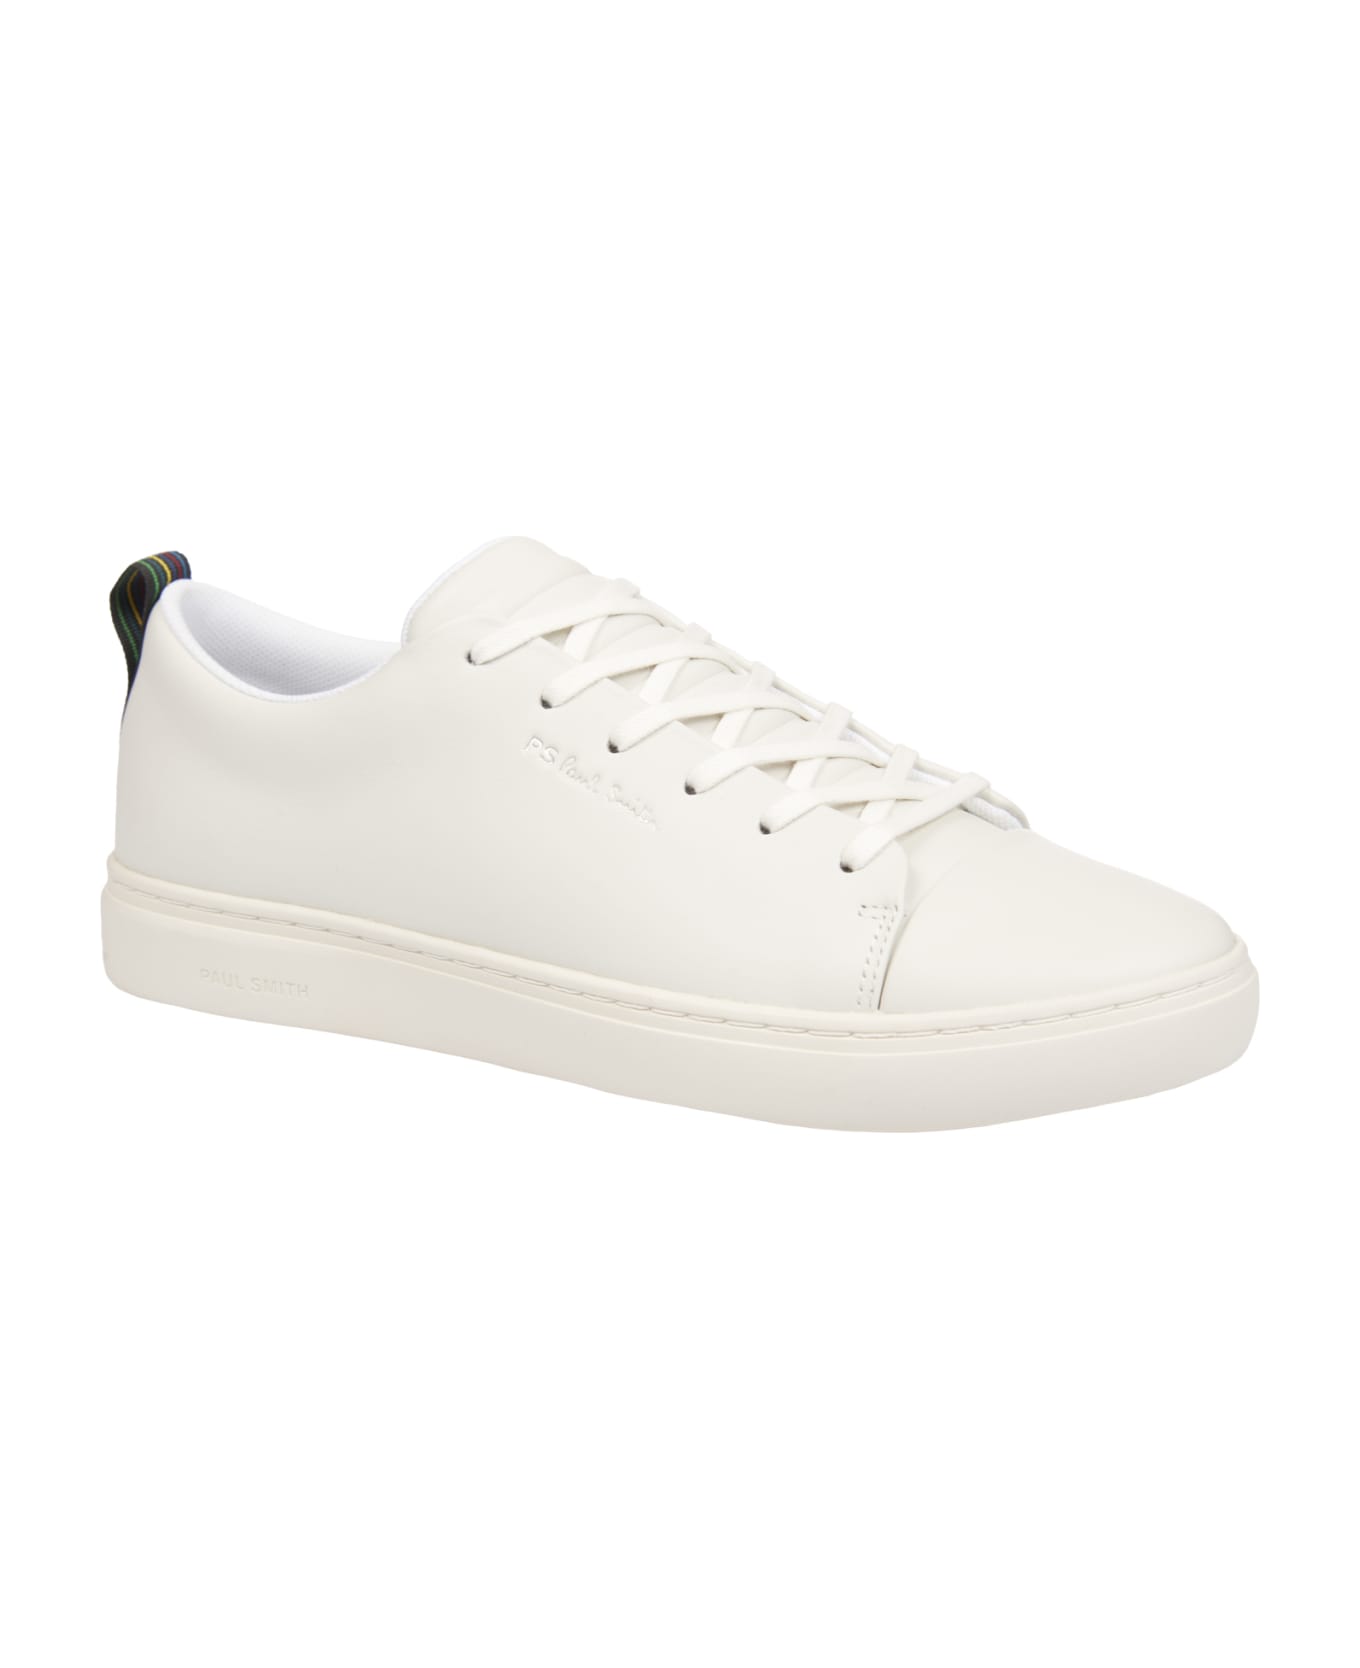 Paul Smith Lee Sneakers - White スニーカー